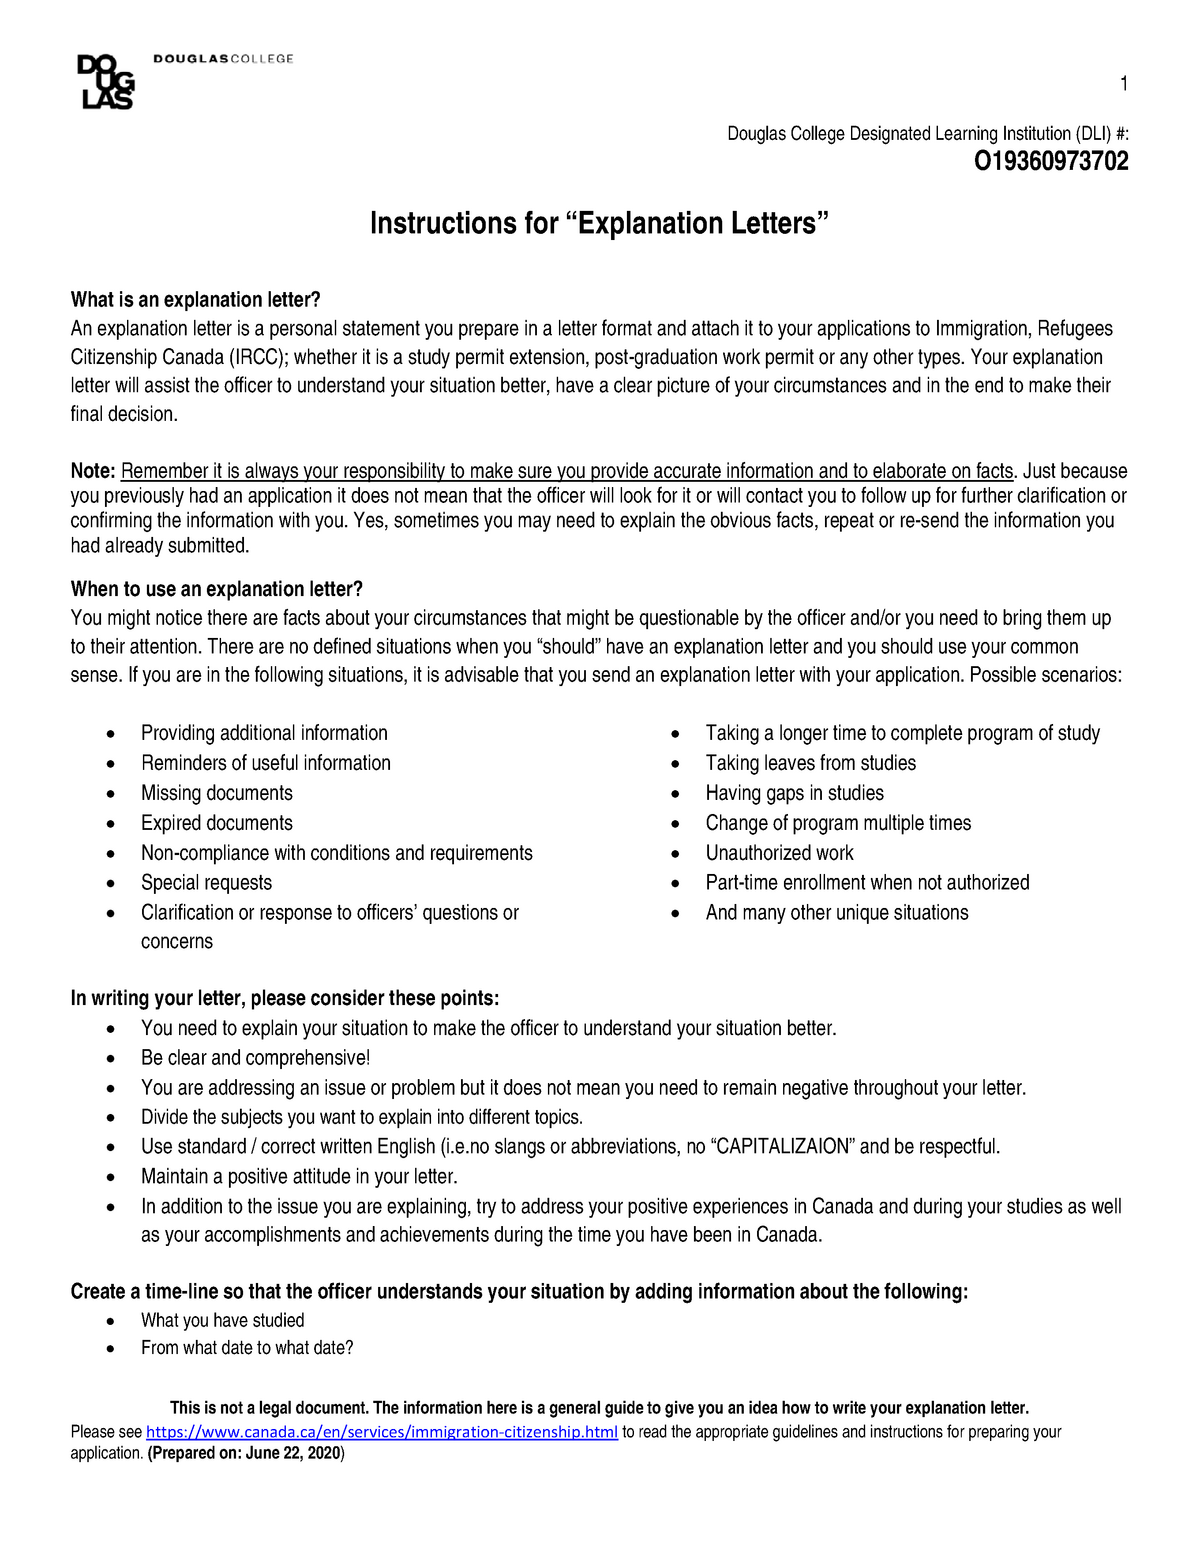 explanation-letter-template-and-instructions-1-this-is-not-a-legal